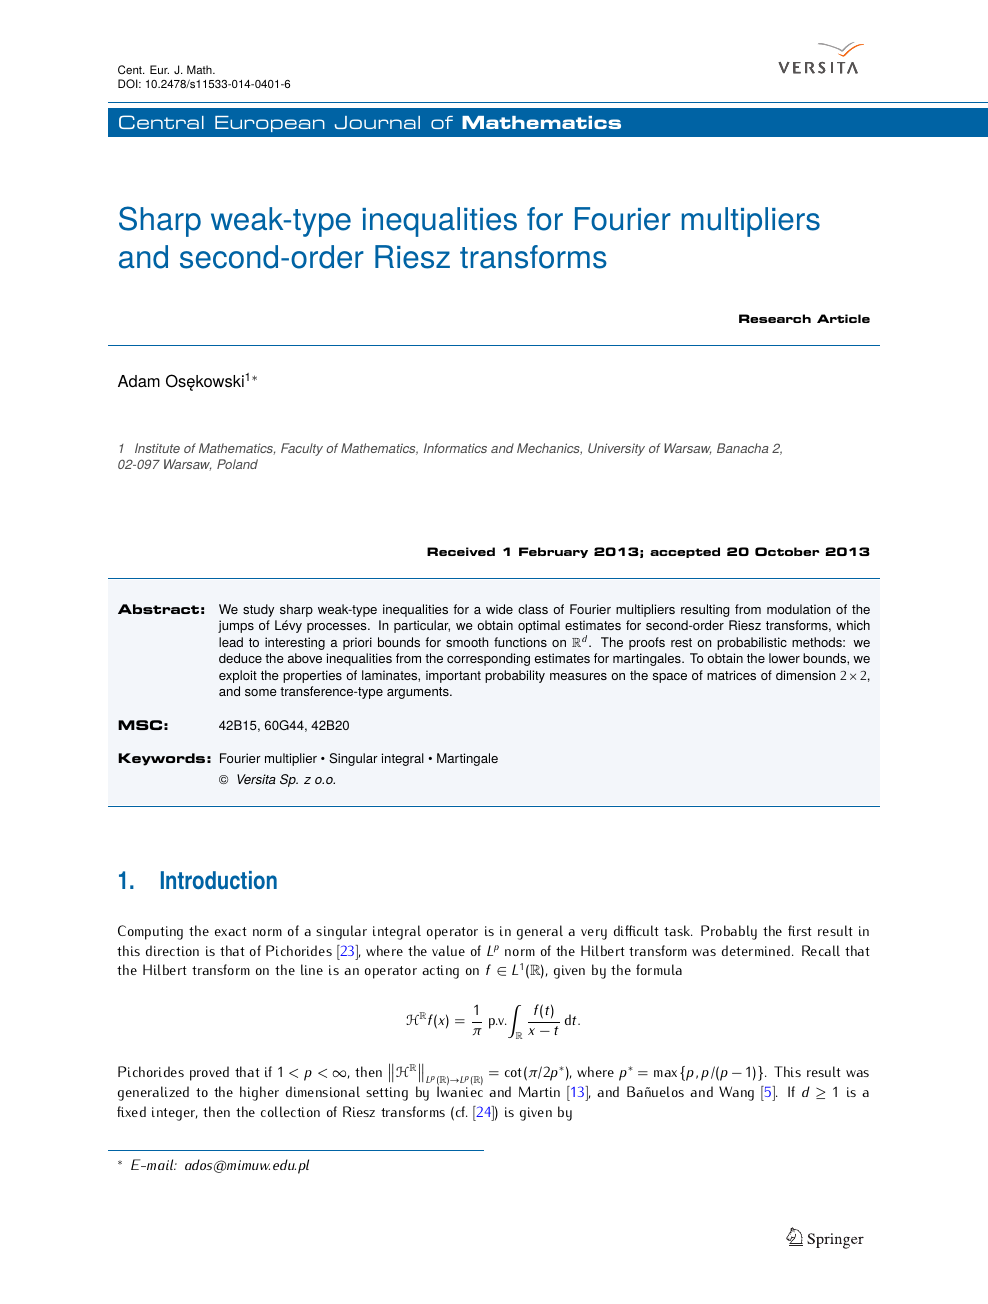 Sharp Weak Type Inequalities For Fourier Multipliers And Second Order Riesz Transforms Topic Of Research Paper In Mathematics Download Scholarly Article Pdf And Read For Free On Cyberleninka Open Science Hub